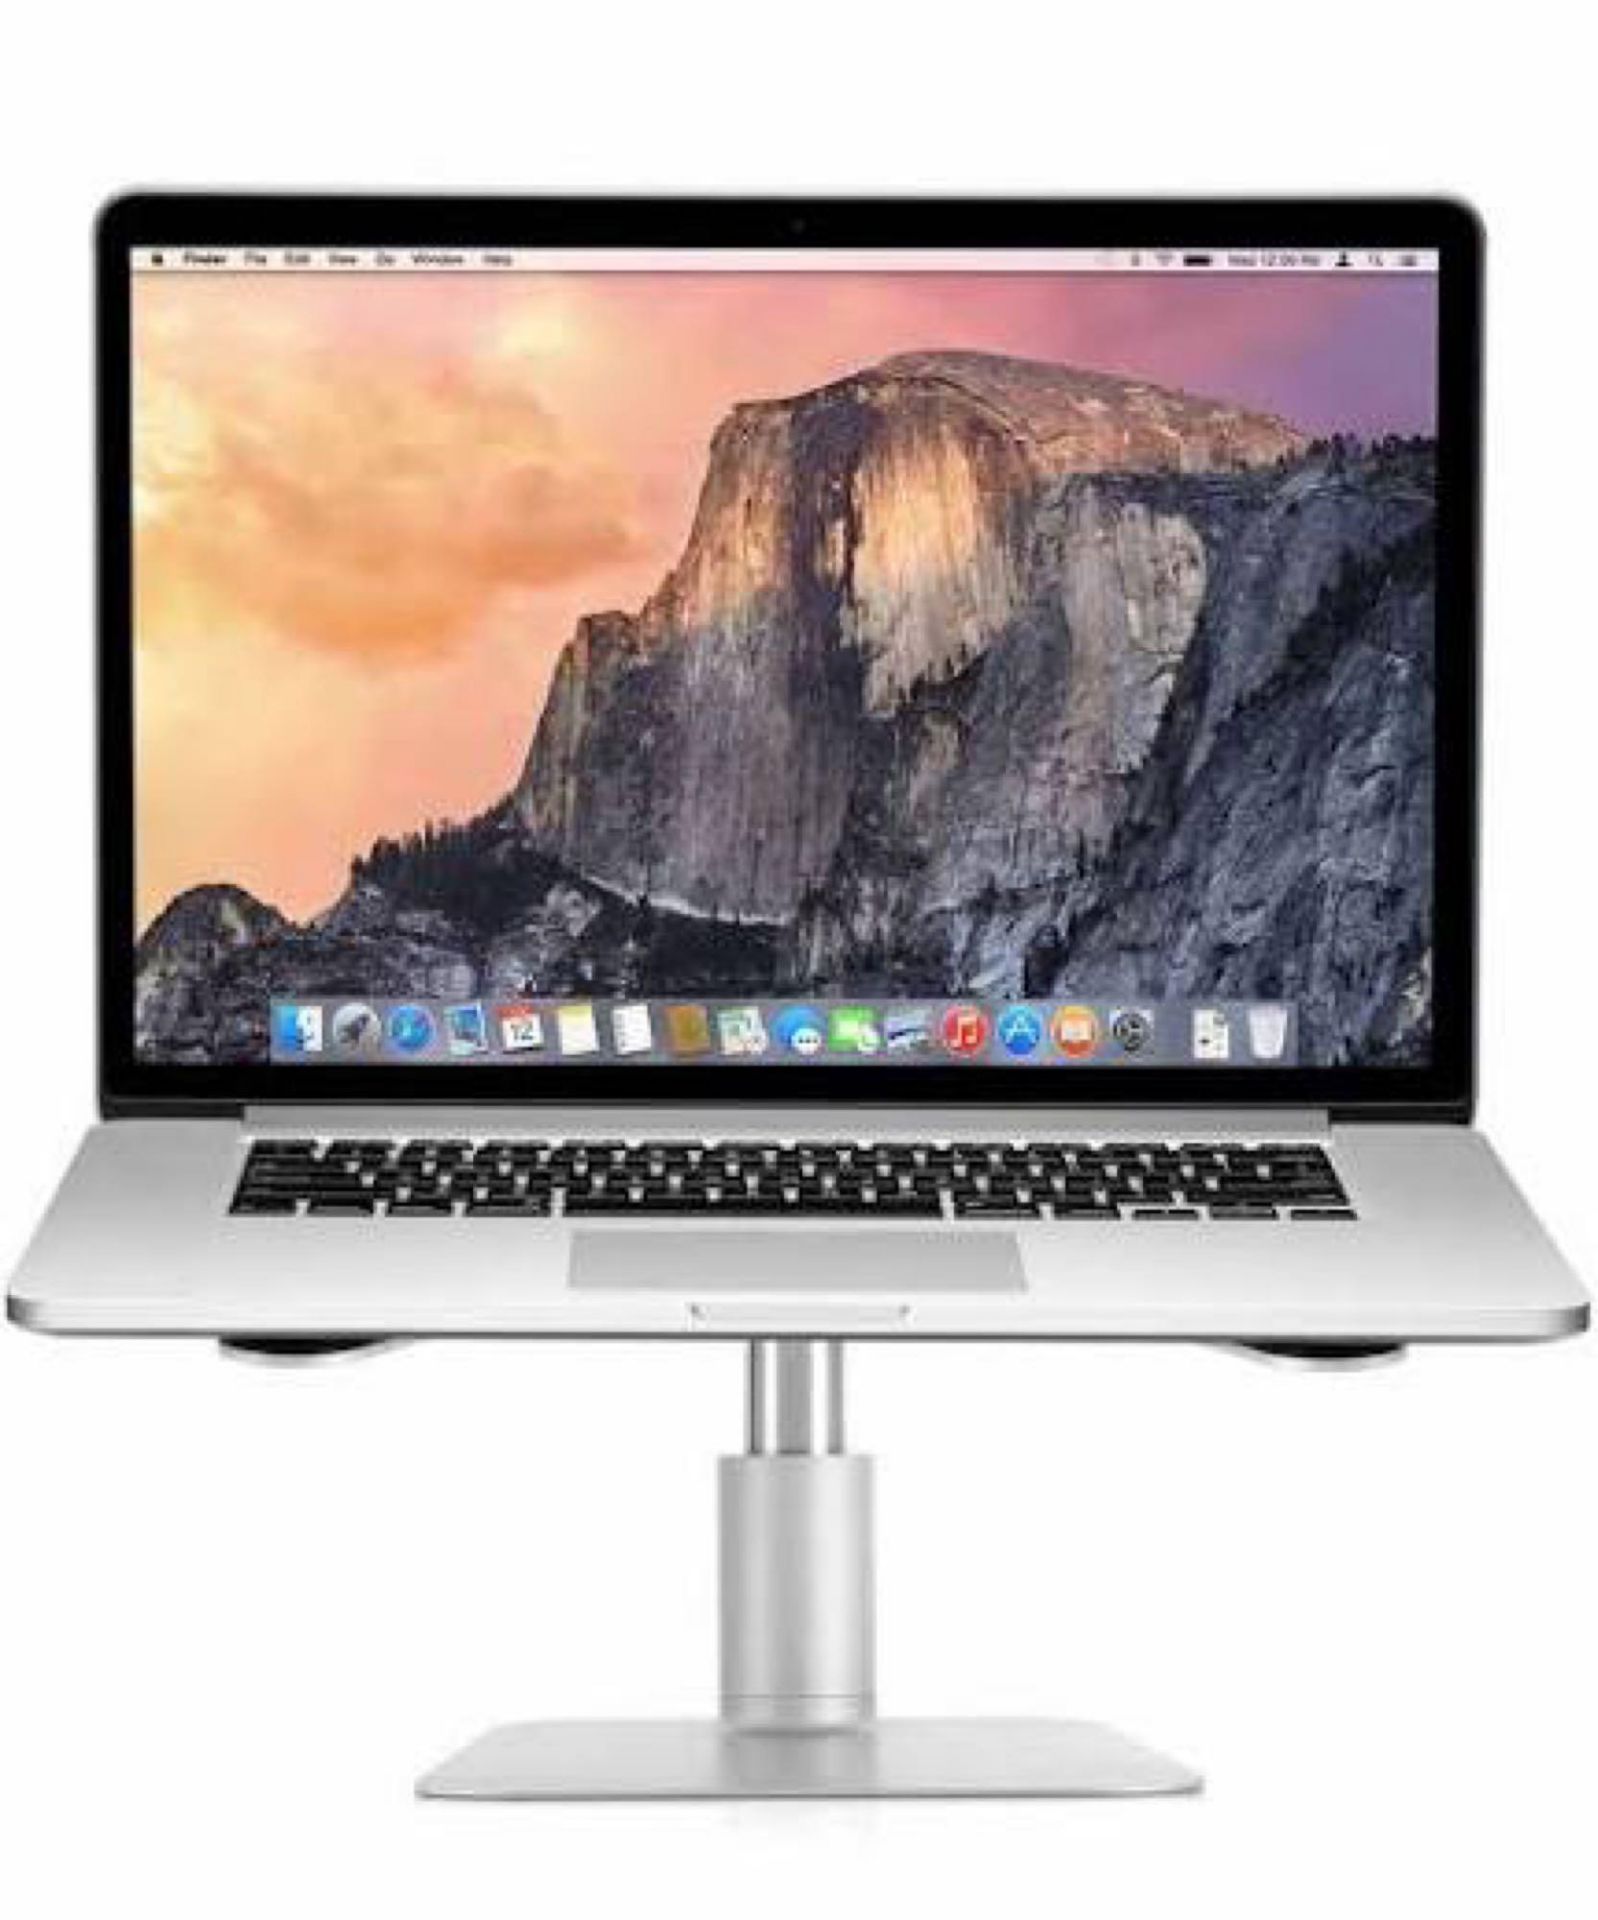 RRP £70 Boxed 12 South High Rise, Adjustable Stand For Macbook